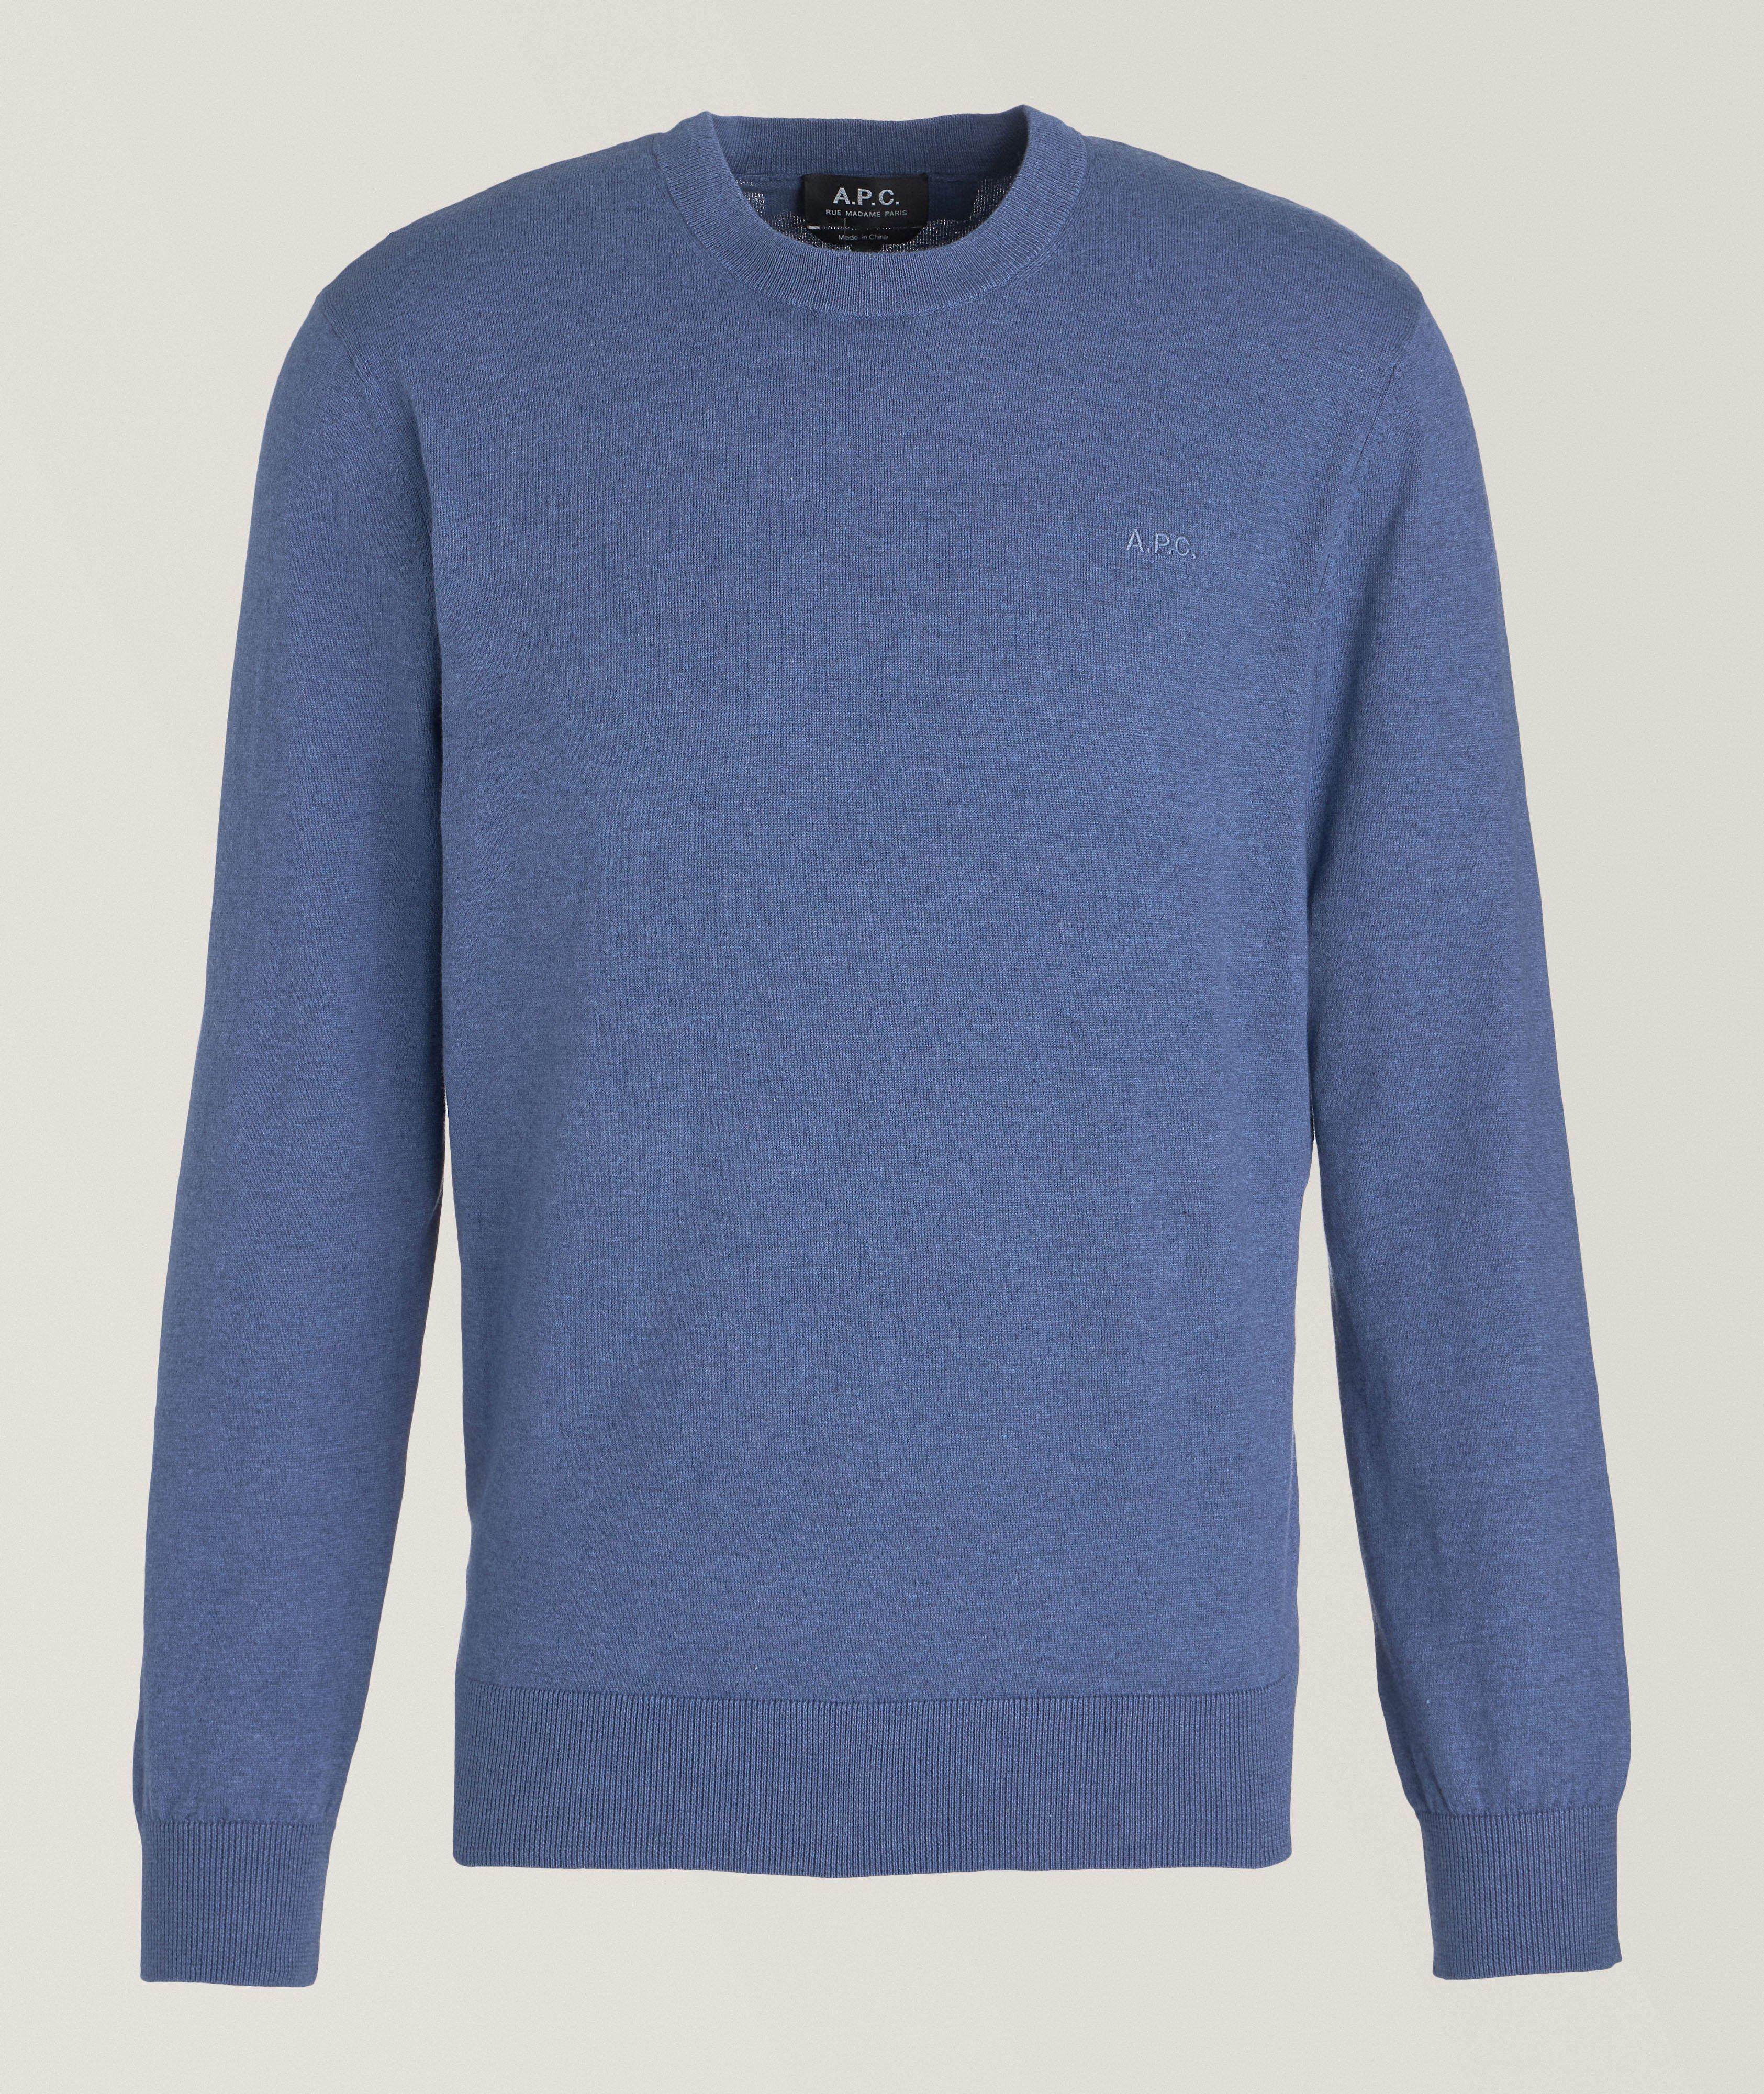 Julo Cotton-Cashmere Knitted Sweater